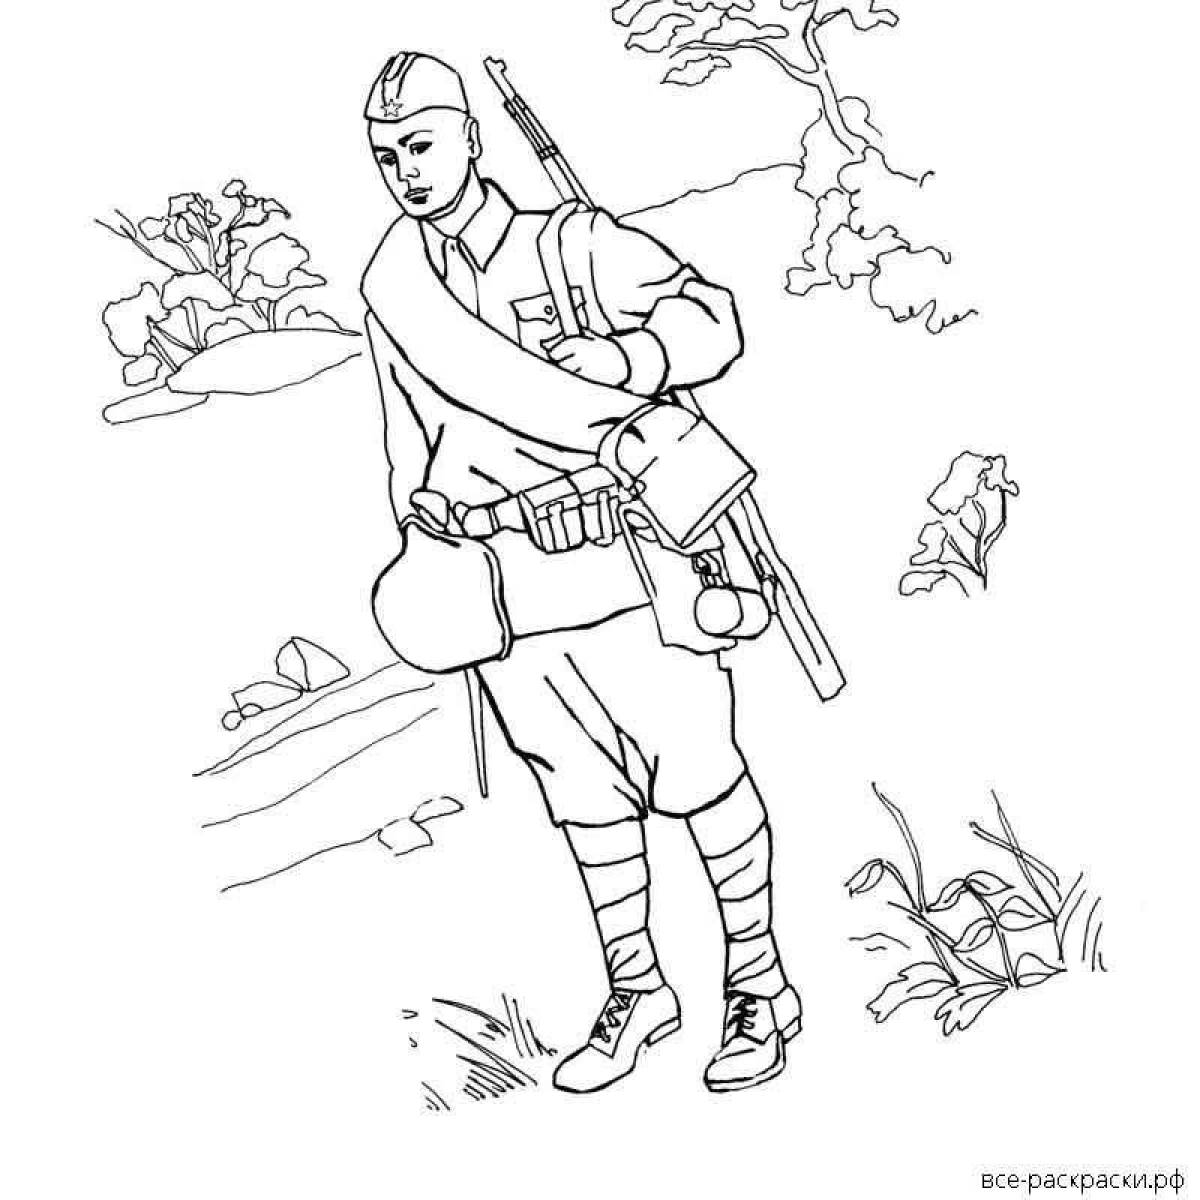 Humorous coloring drawing of a soldier from a schoolboy